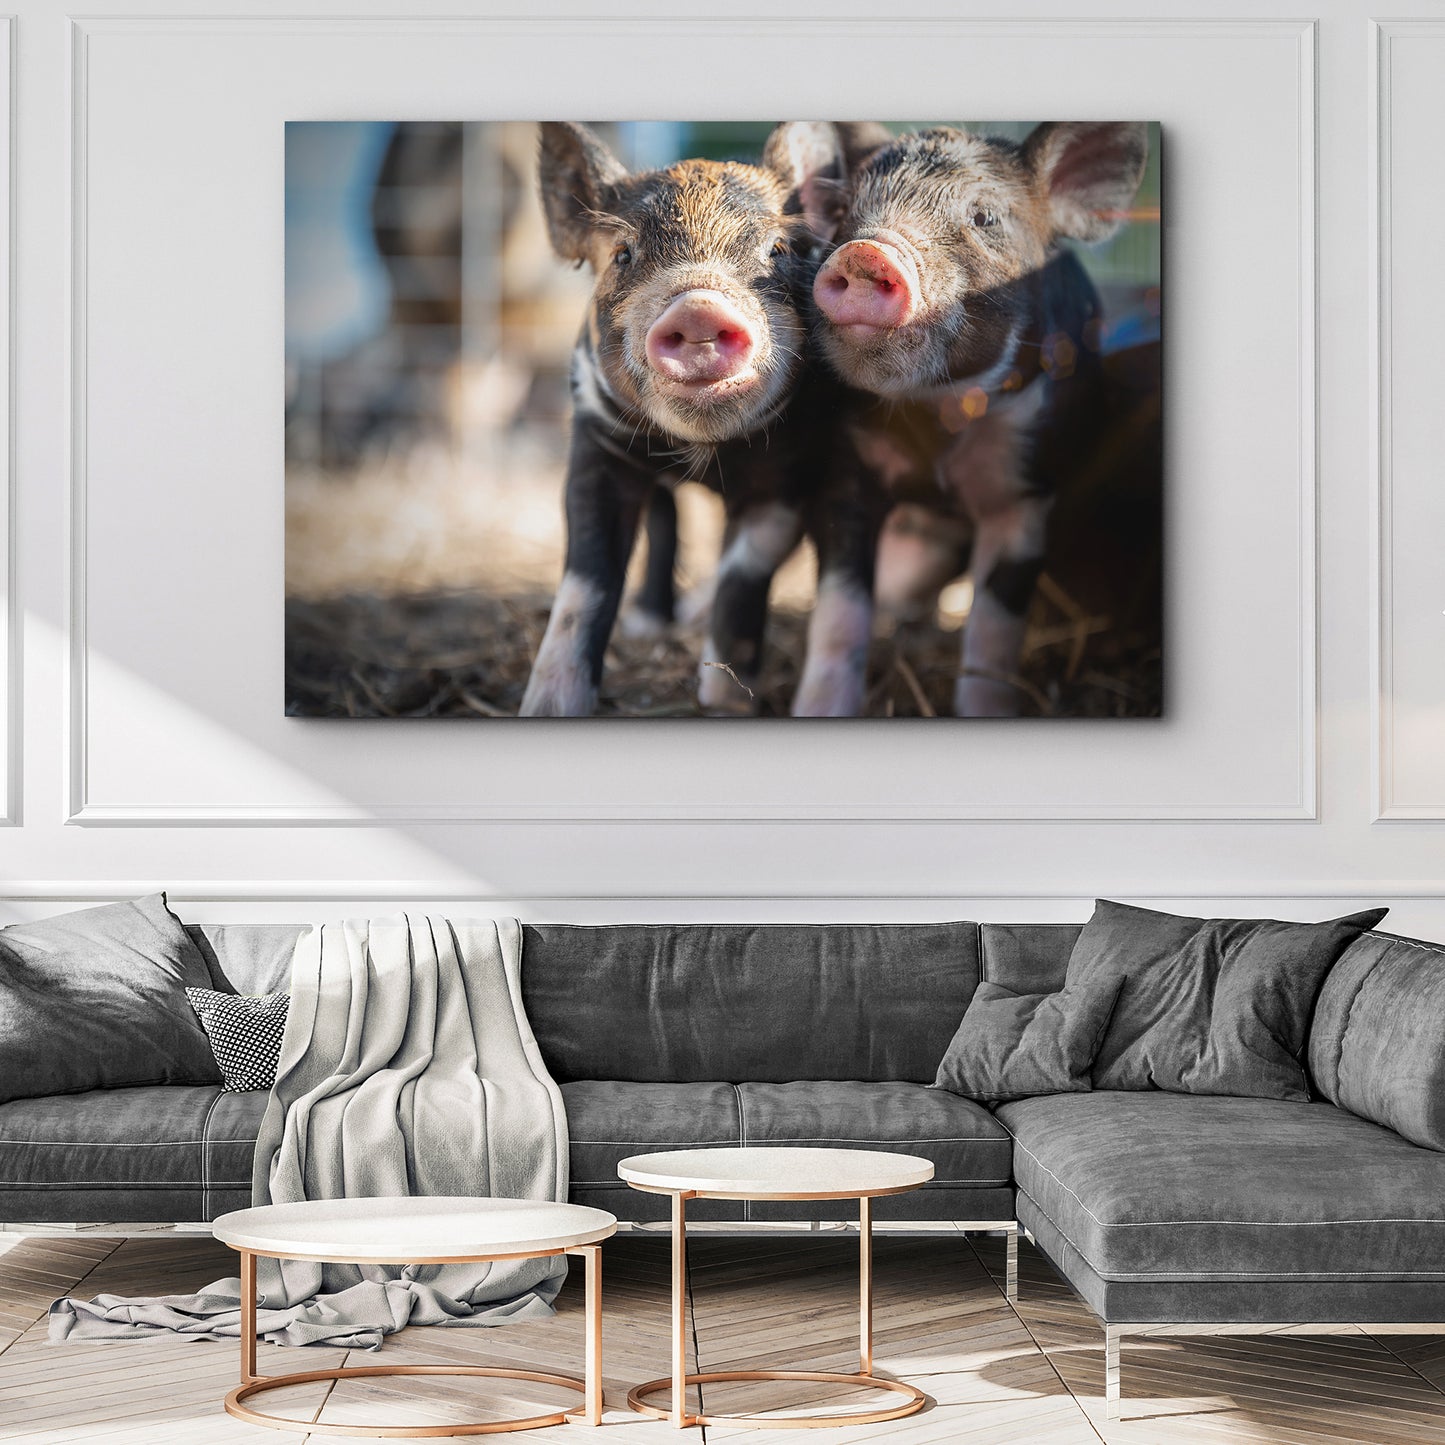 Adorable Piglets Canvas Wall Art Style 2 - Image by Tailored Canvases